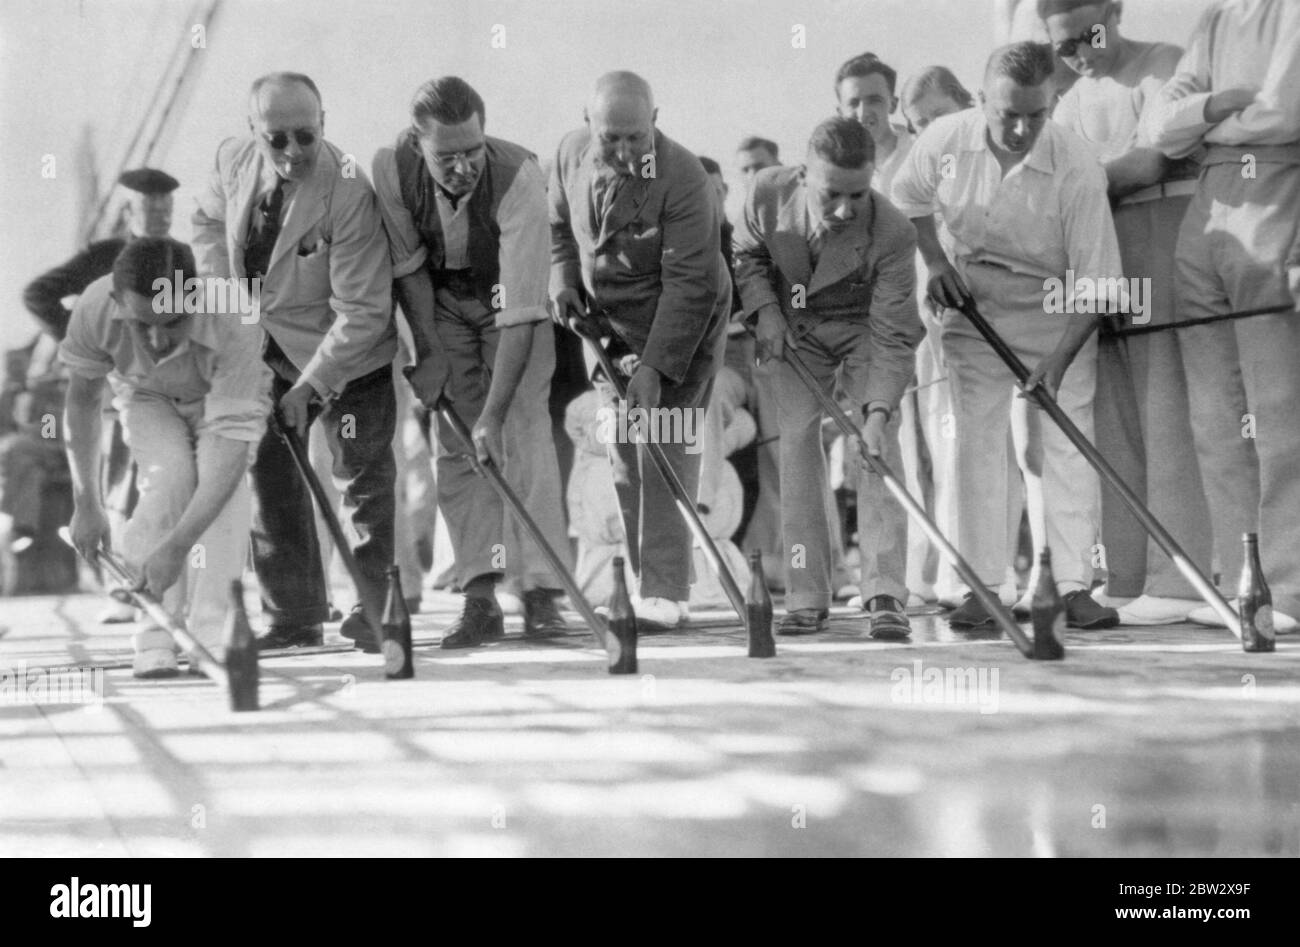 Deck games on board an ocean liner in the 1930s. Here is a variation on the game of 'Shuffleboard' with a race involving empty beer bottles being pushed along by six male passengers using long sticks. Stock Photo